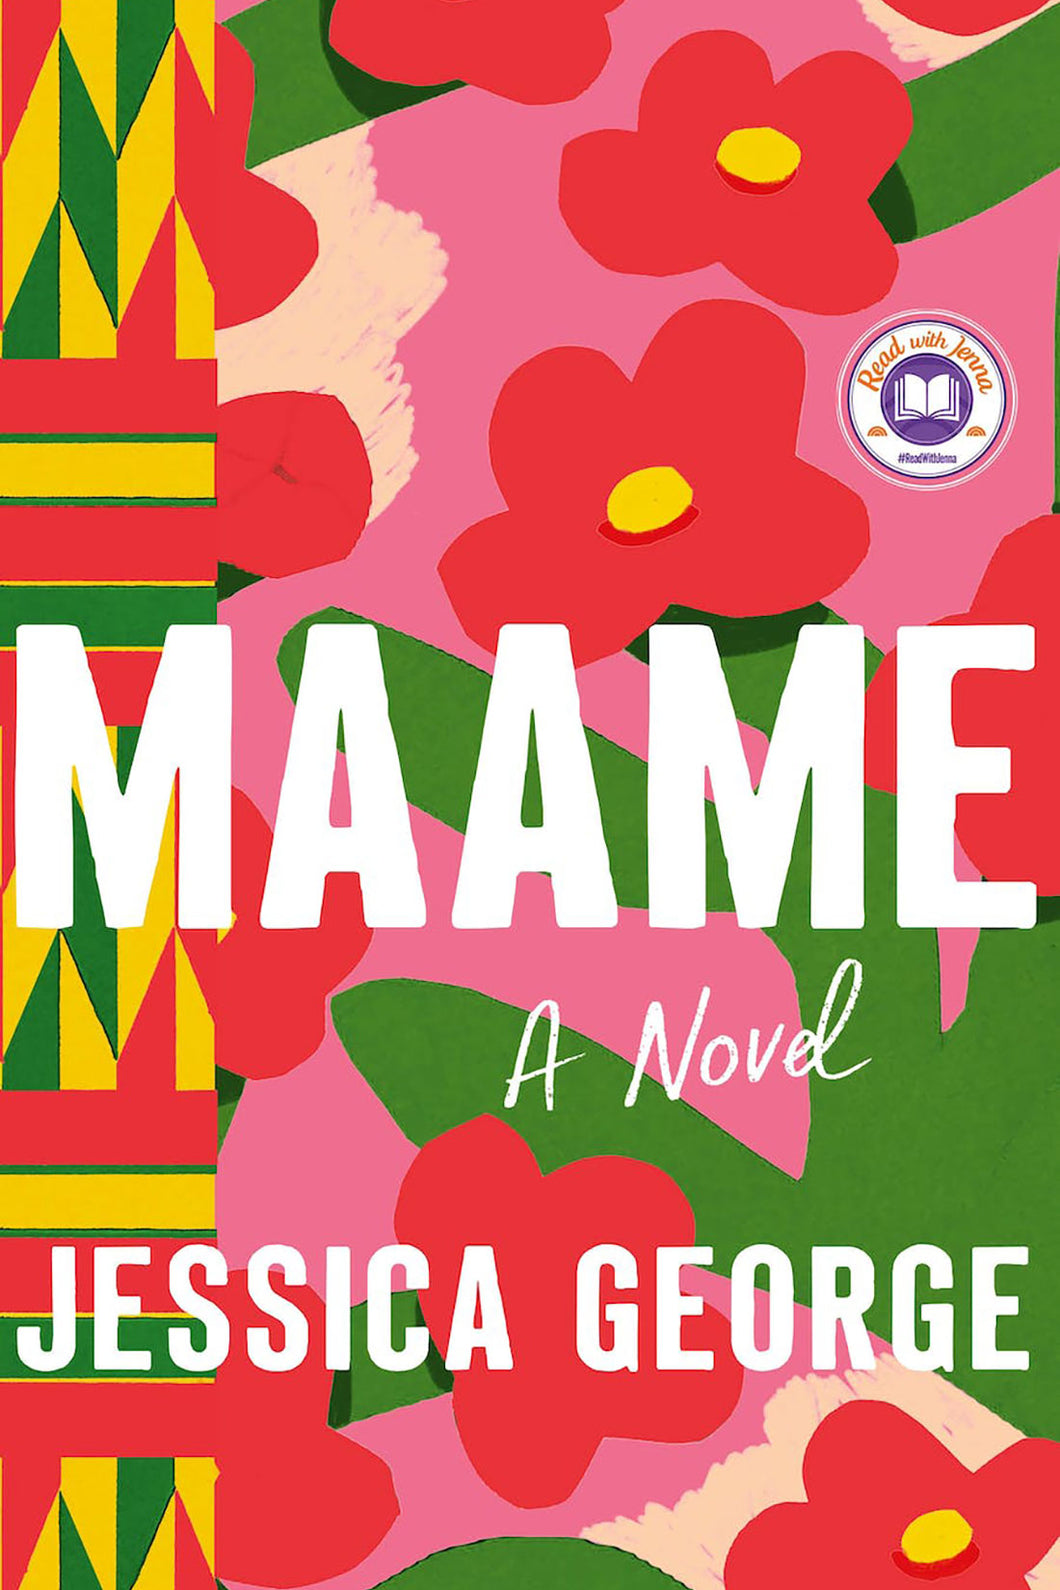 Maame by Jessica George / BOOK OR BUNDLE - Starting at $28!